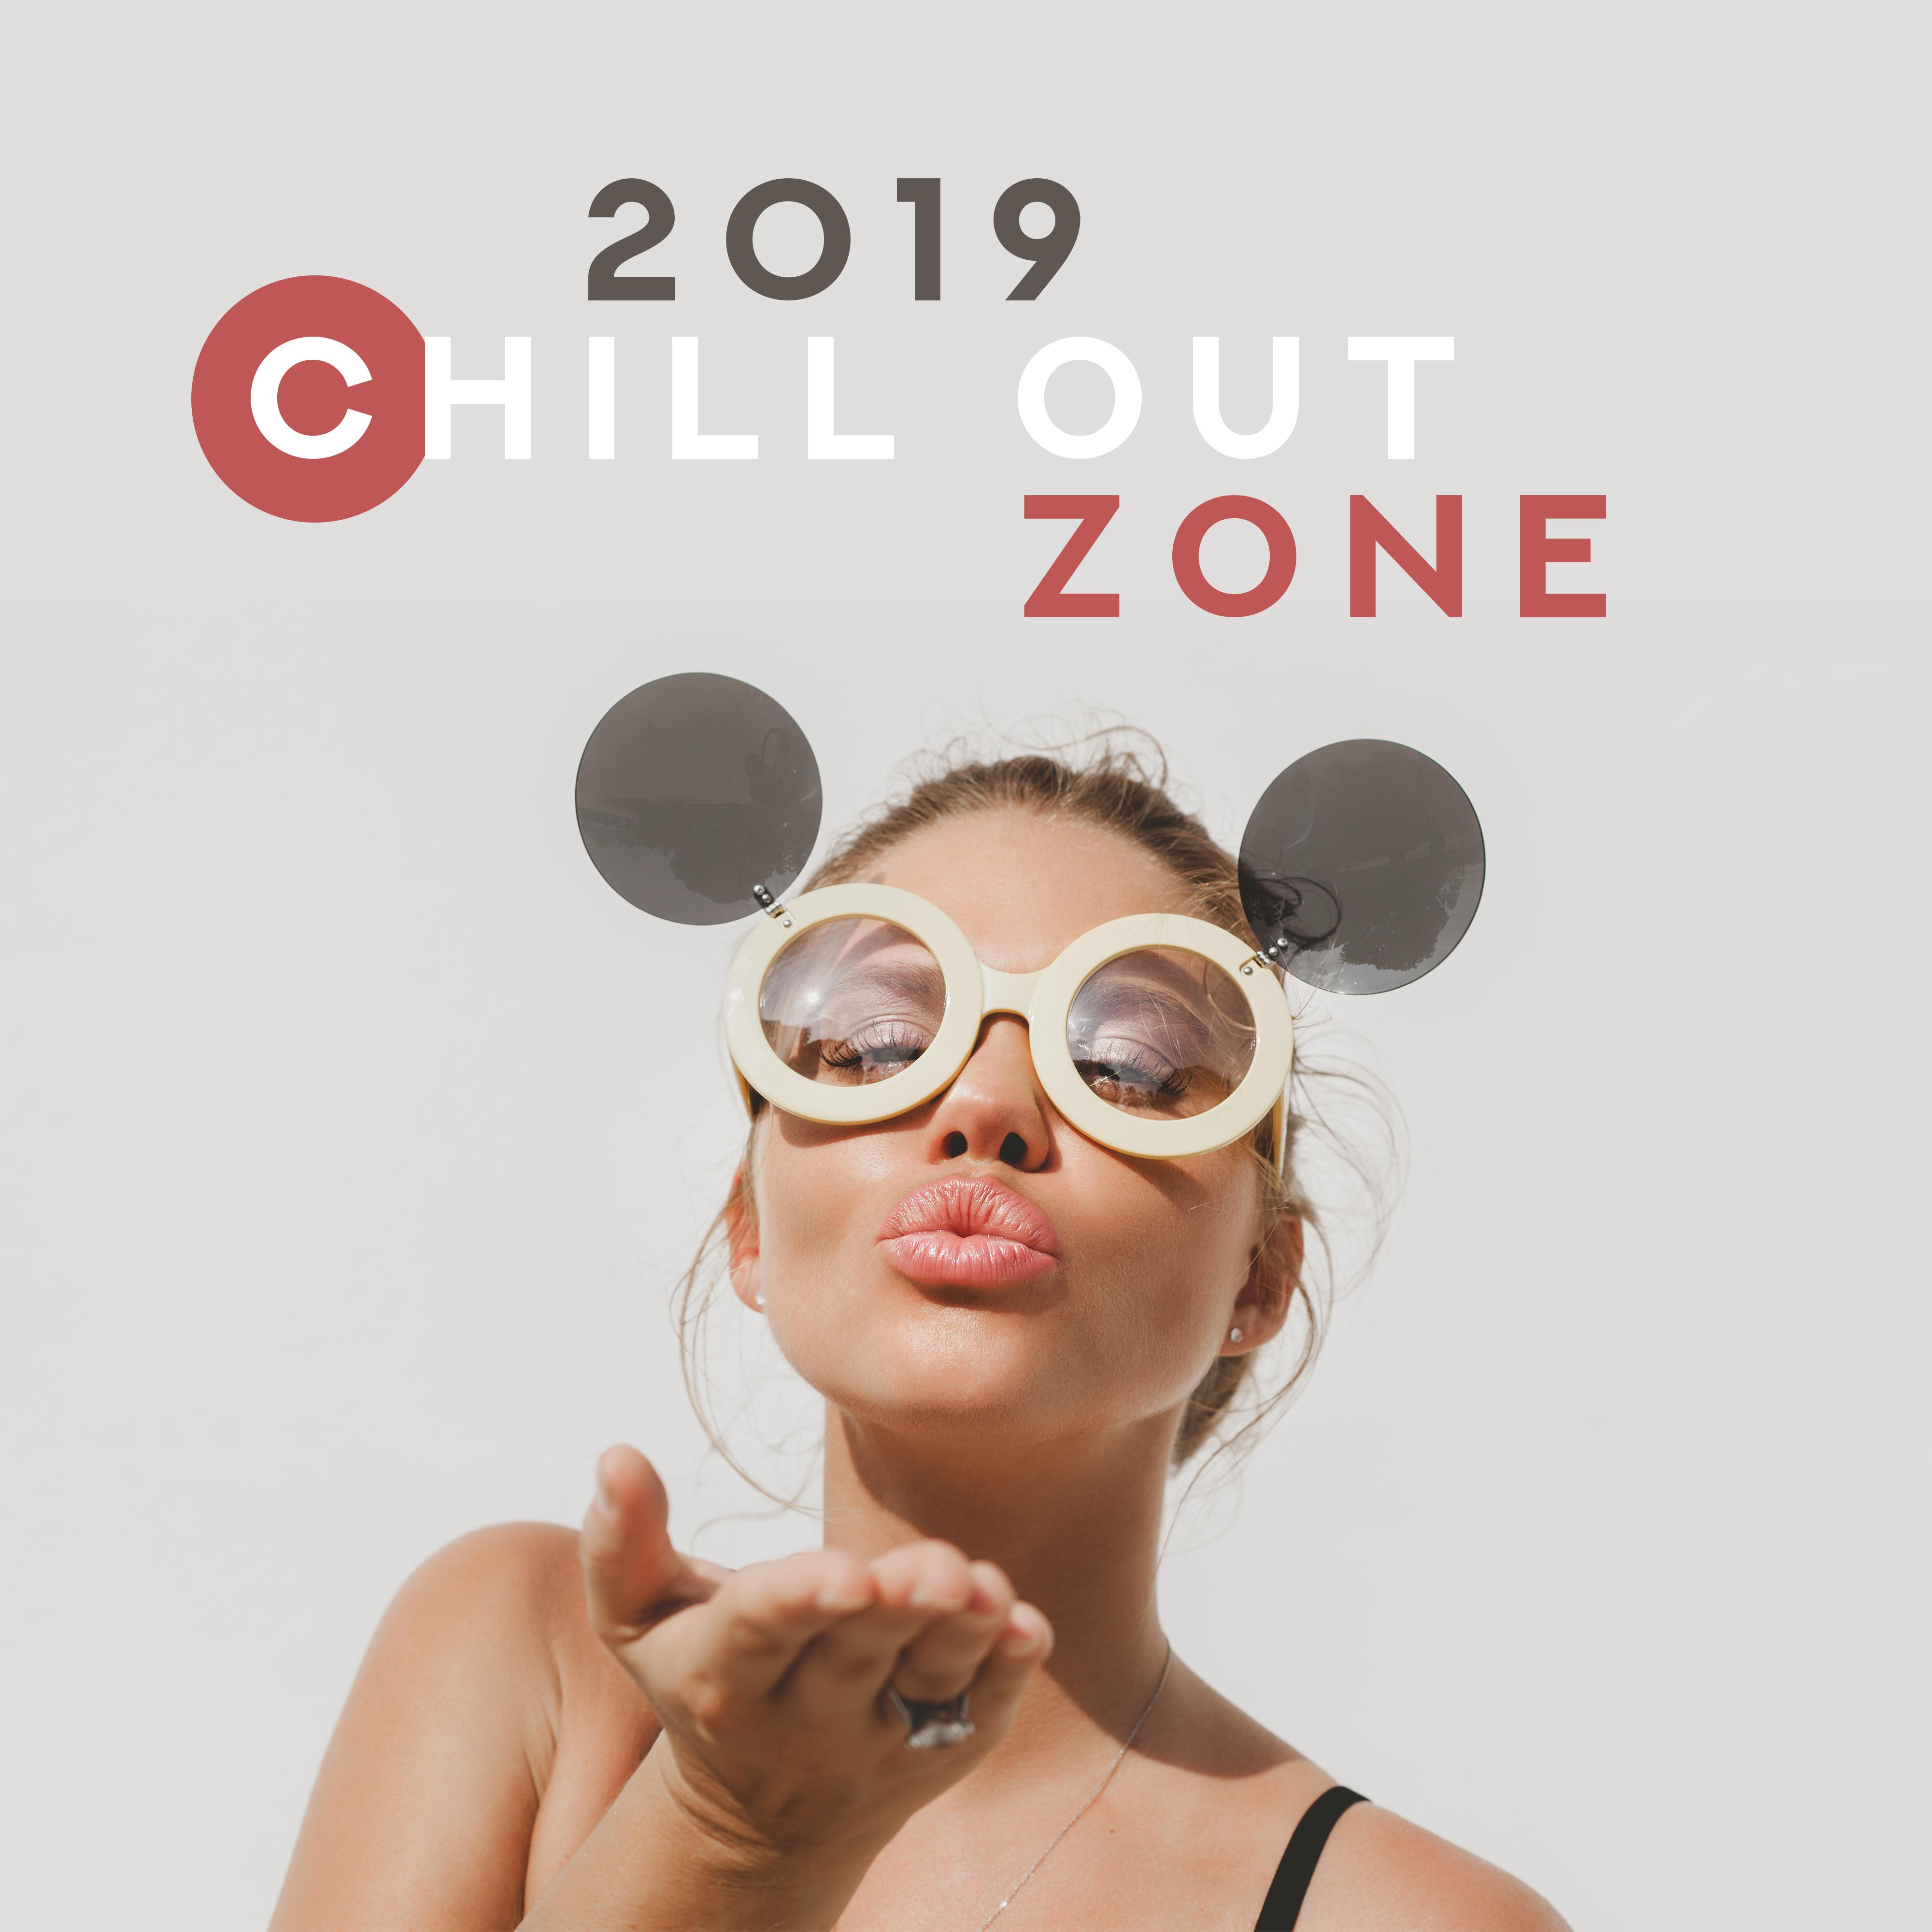 2019 Chill Out Zone – Bar Lounge, Ibiza Relaxation, Reduce Stress, Weekend Deep Chillout, **** Chillout Balearic, Fresh Music